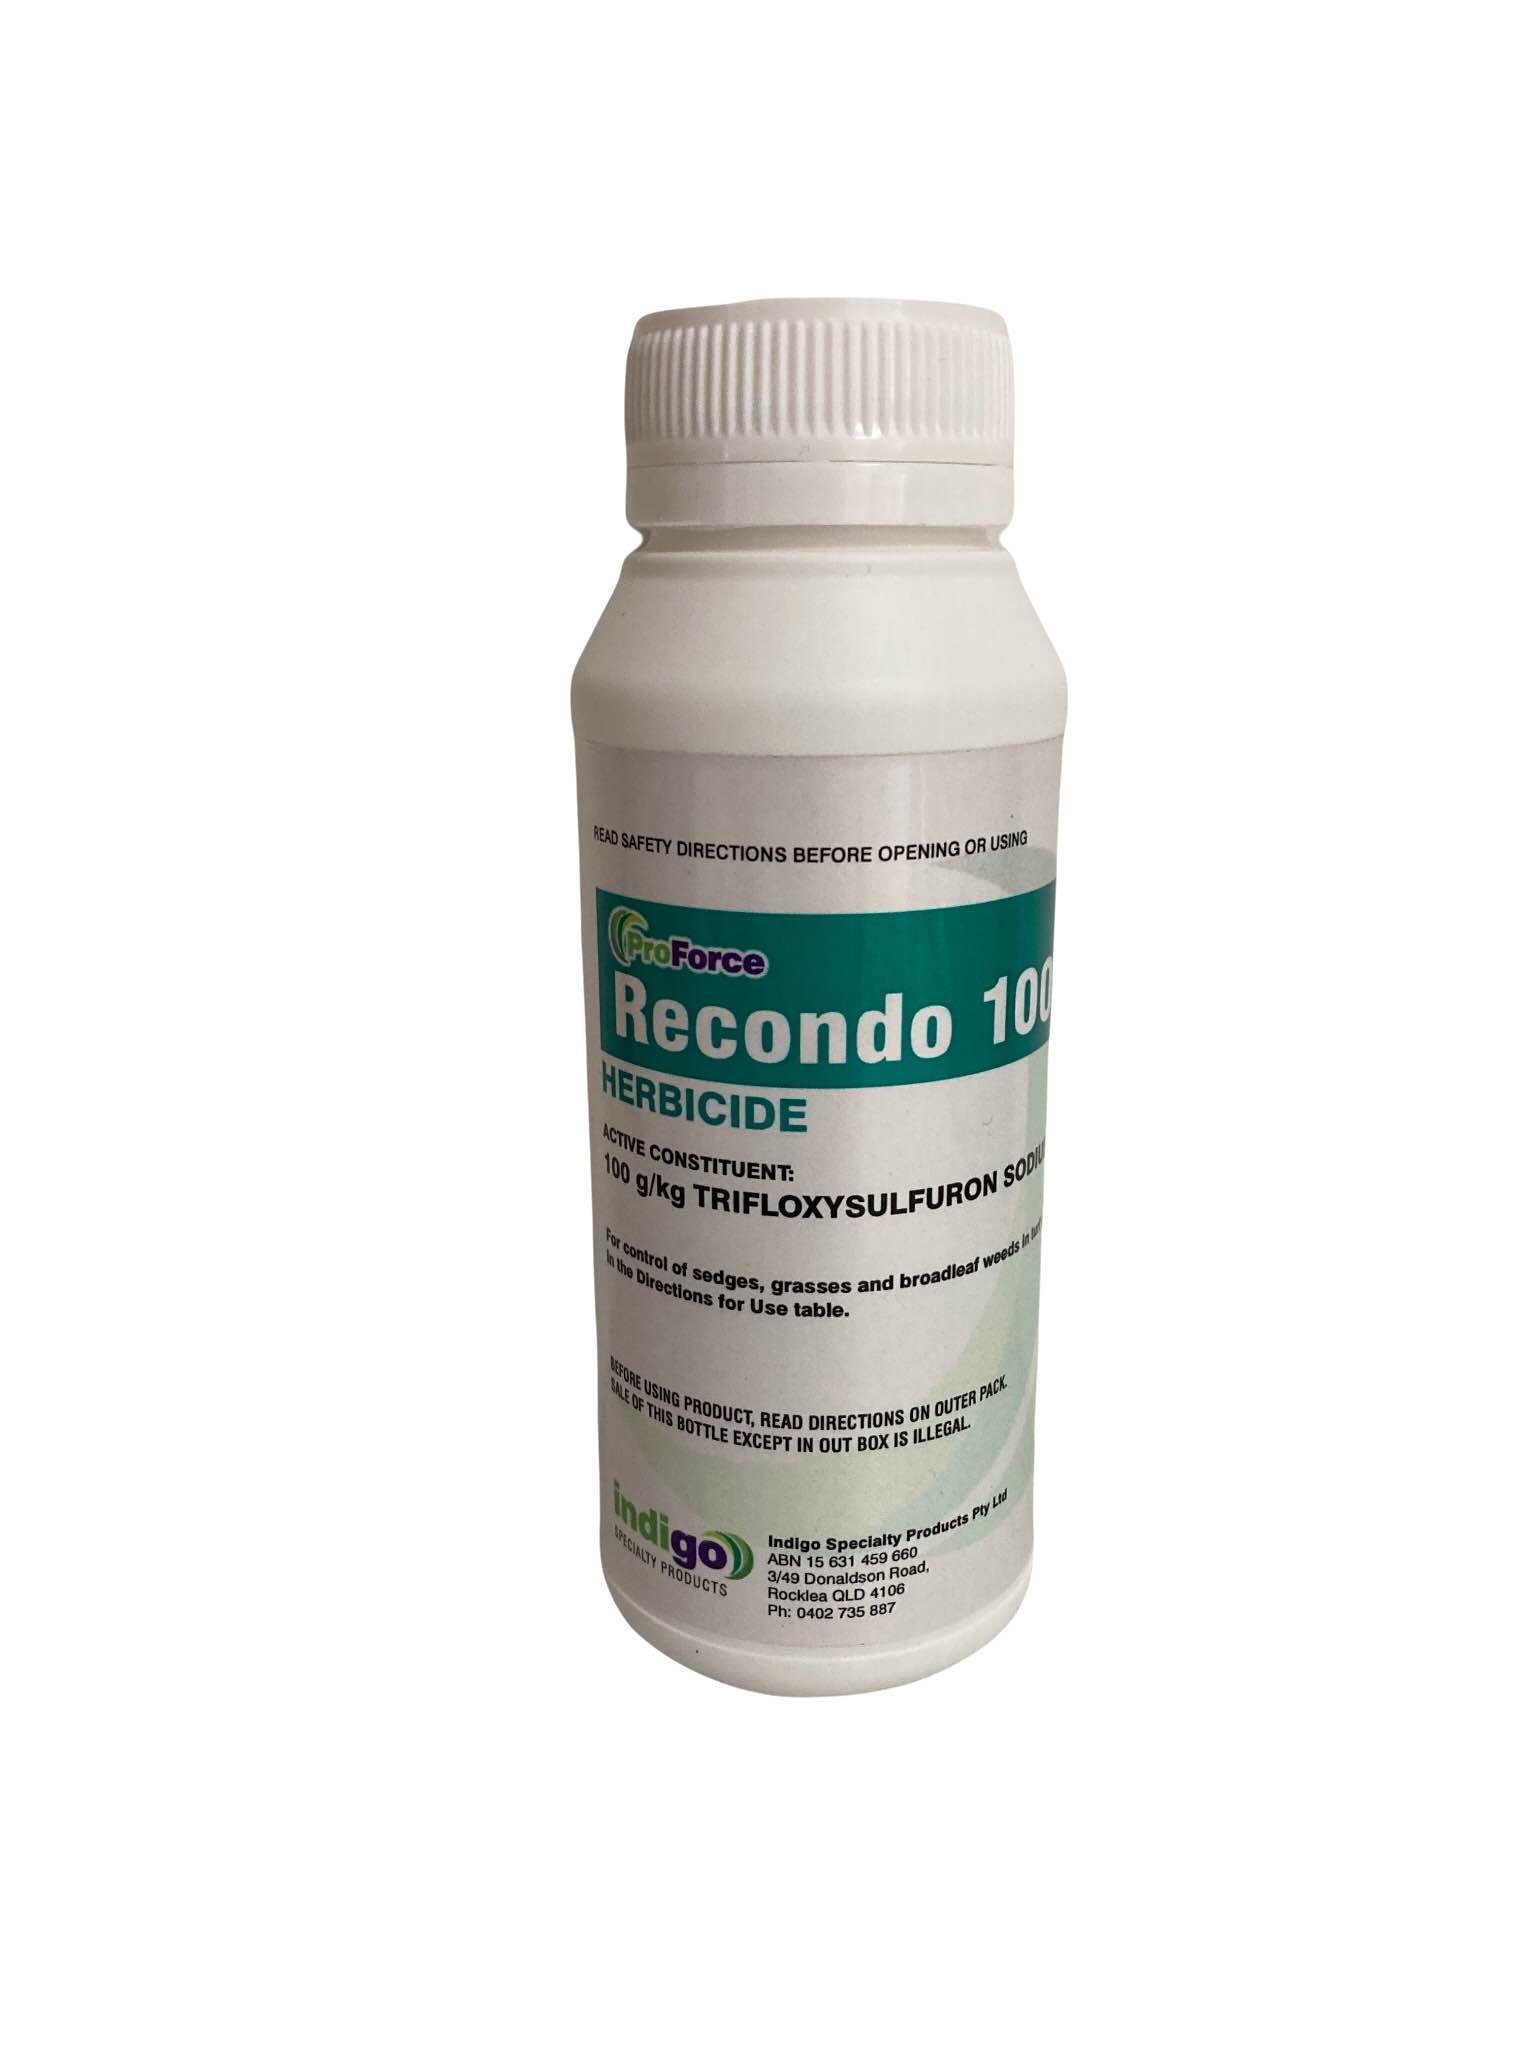 Recondo turf herbicide is a generic Monument herbicide